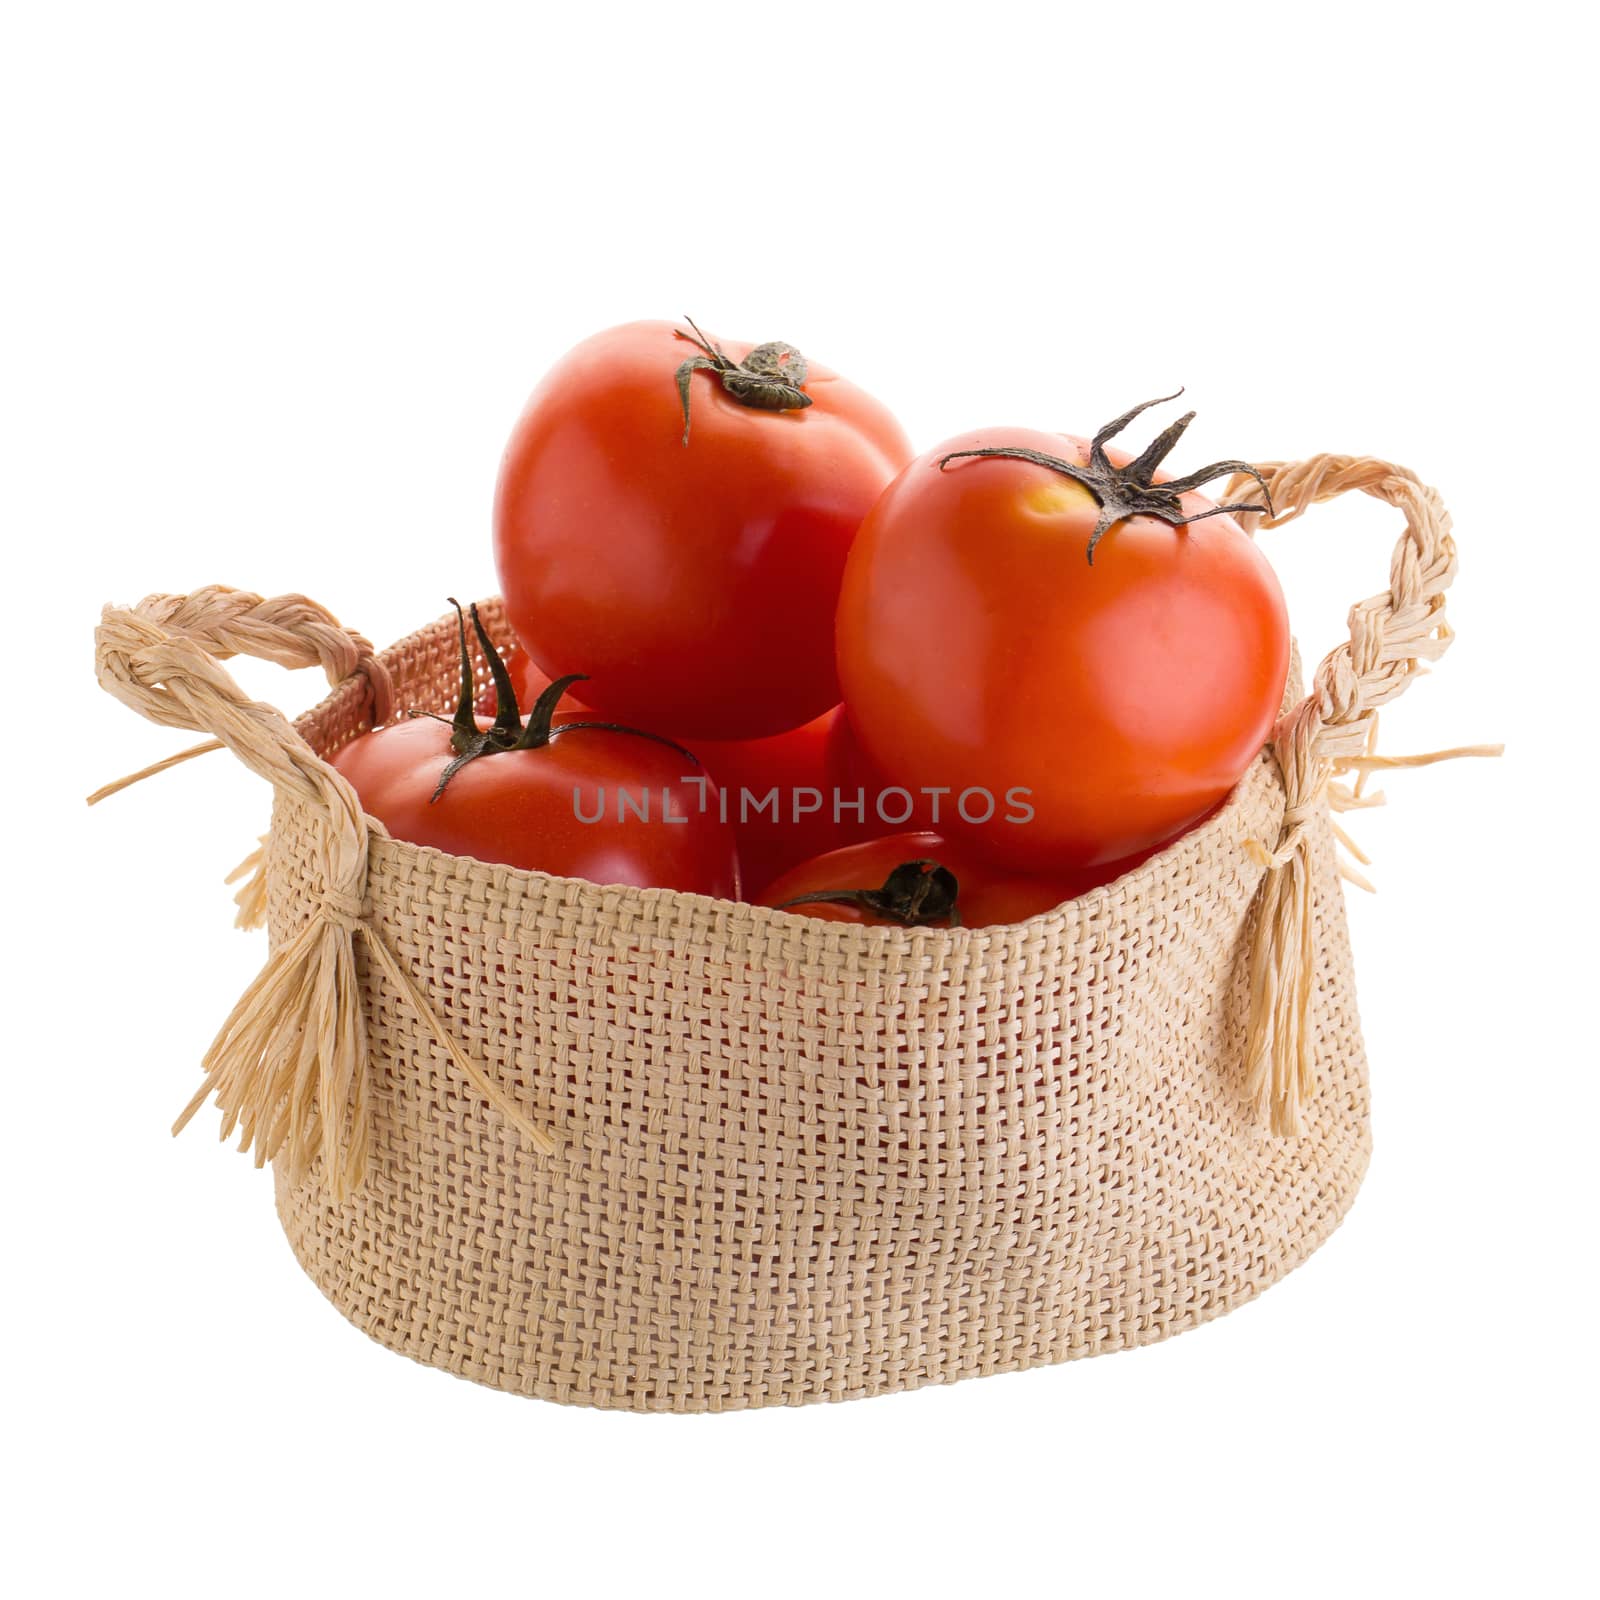 Tomato In the basket isolated on a white background.